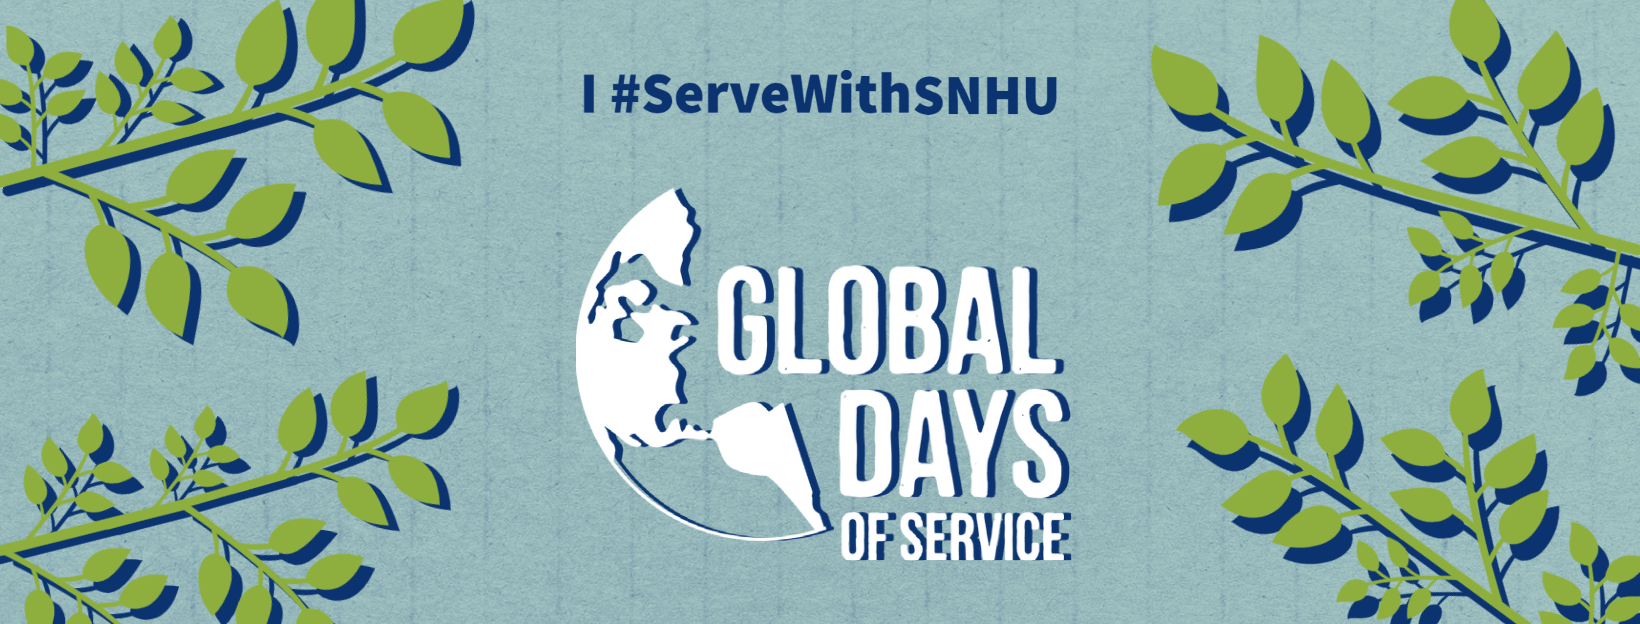 Global Days of Service cover image for Facebook profile